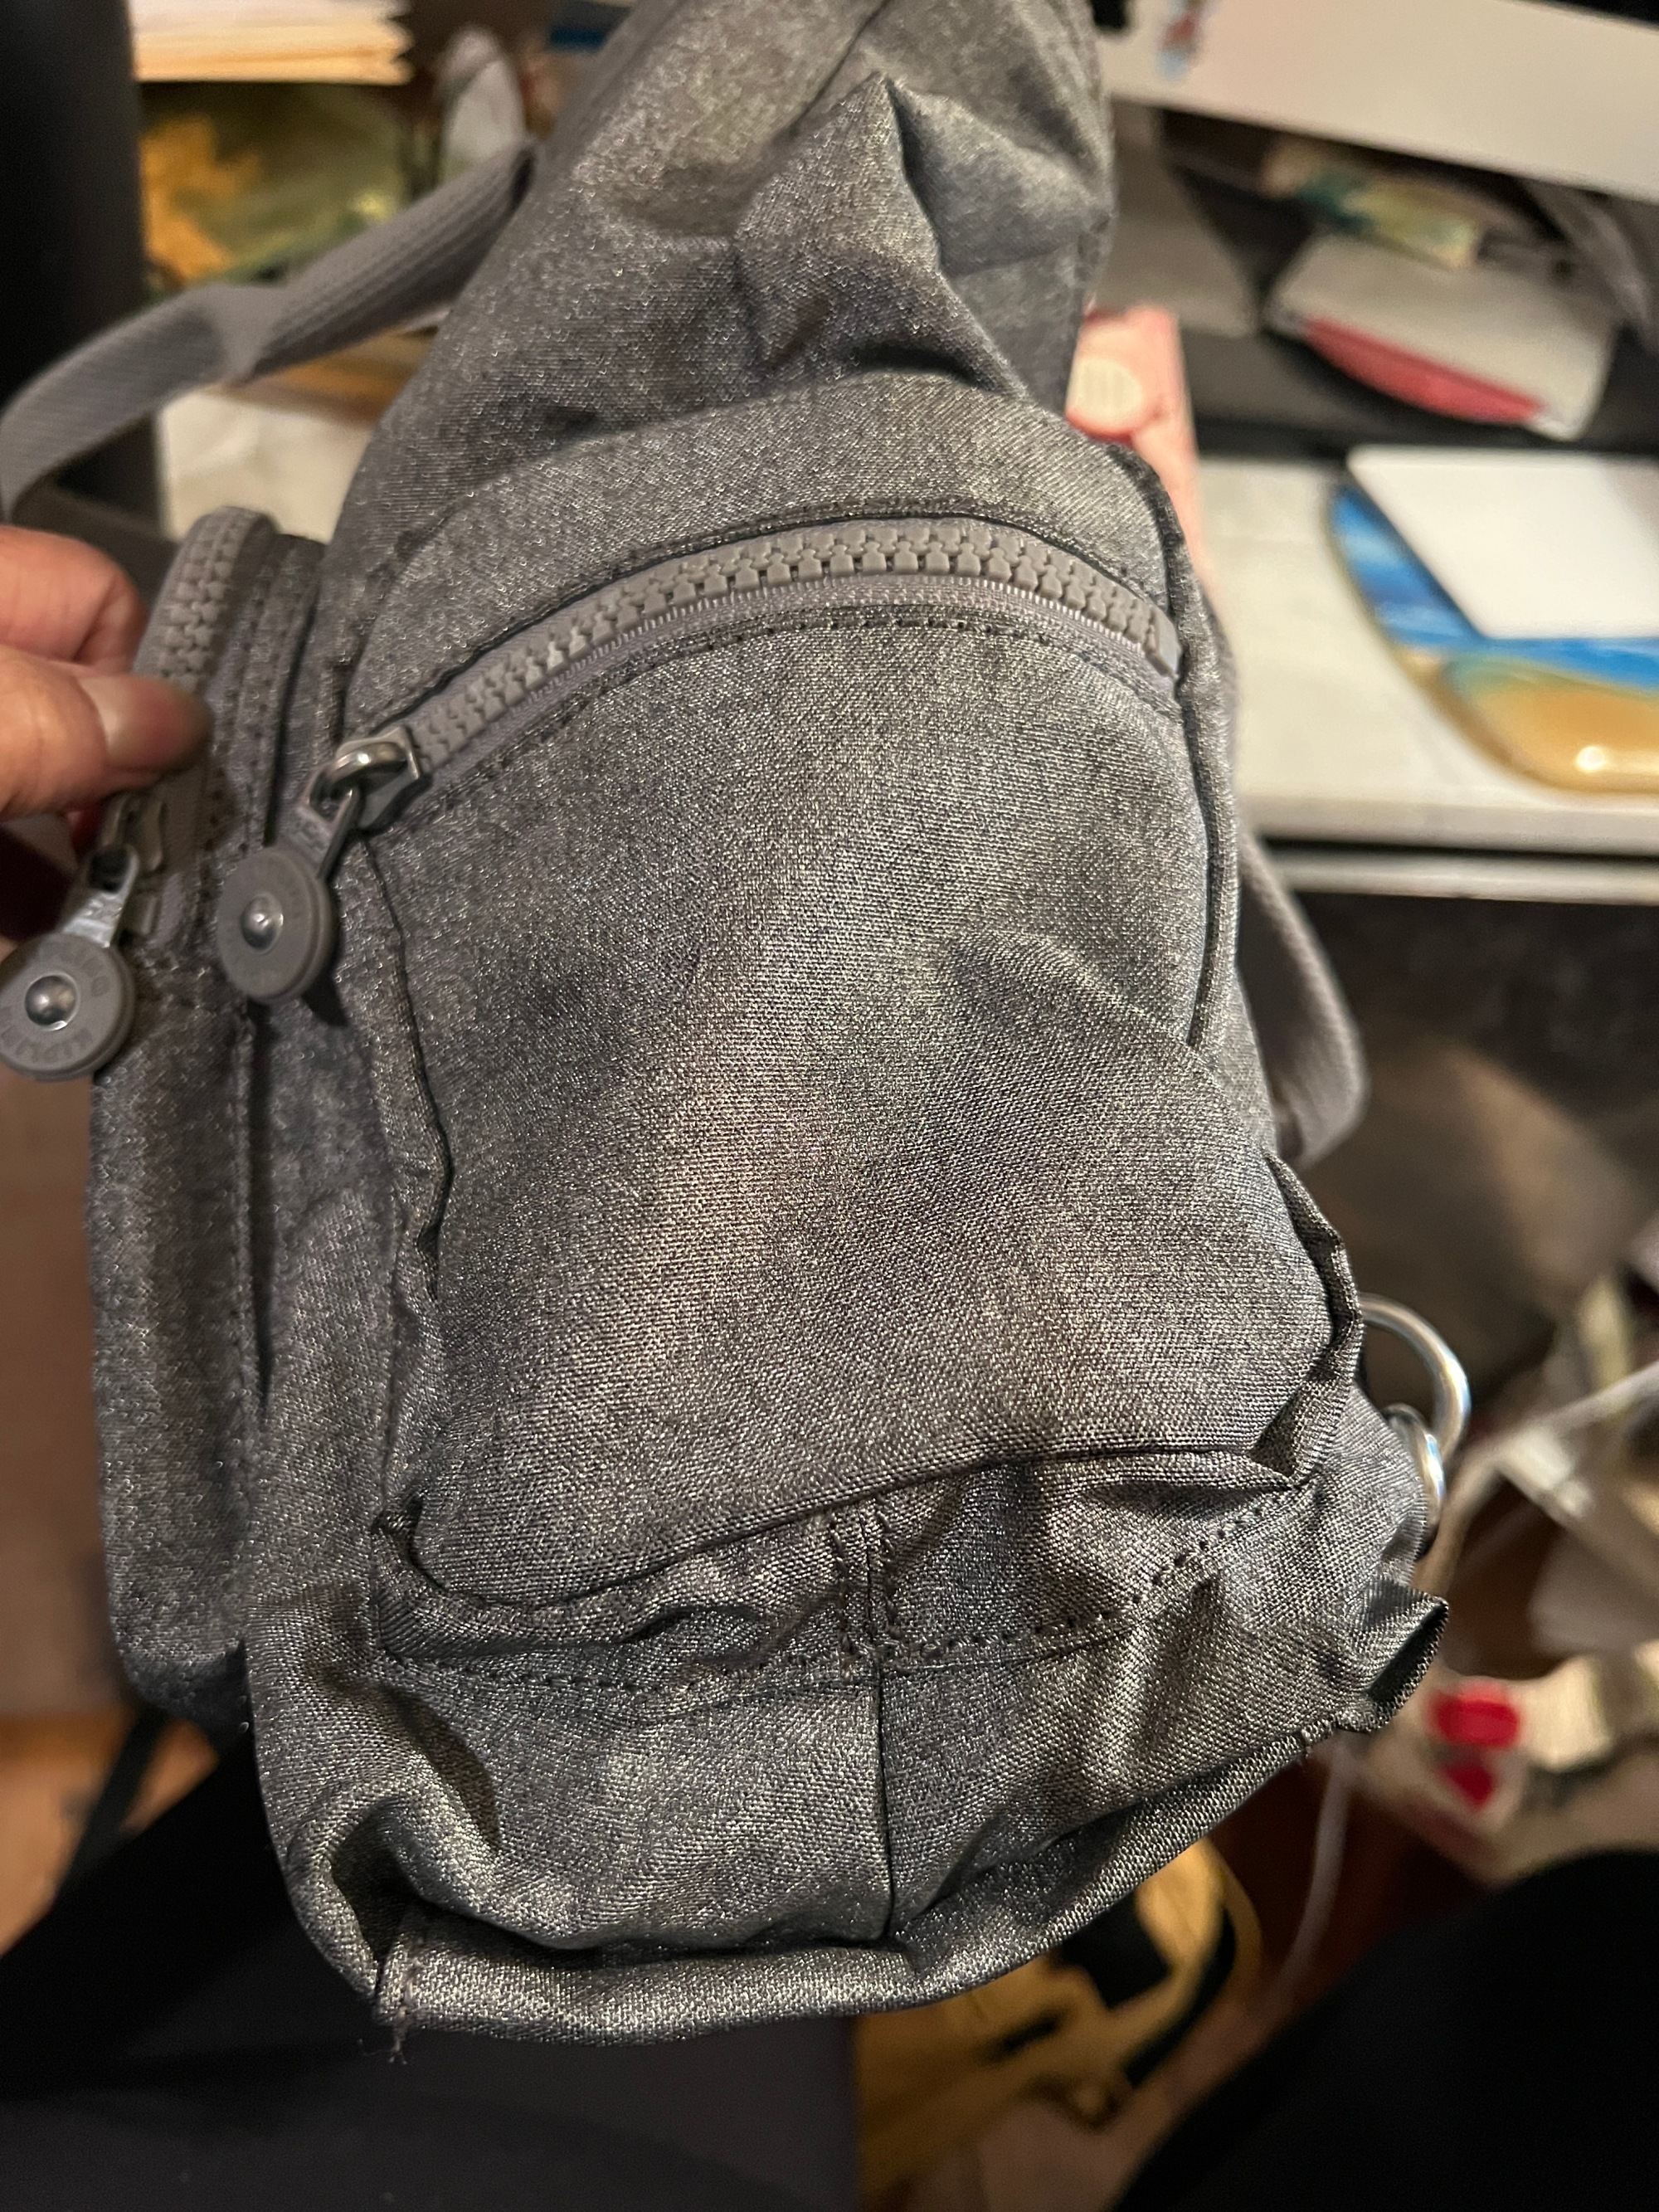 50 favorite bags | Giving away a bag a day in Lent 2021